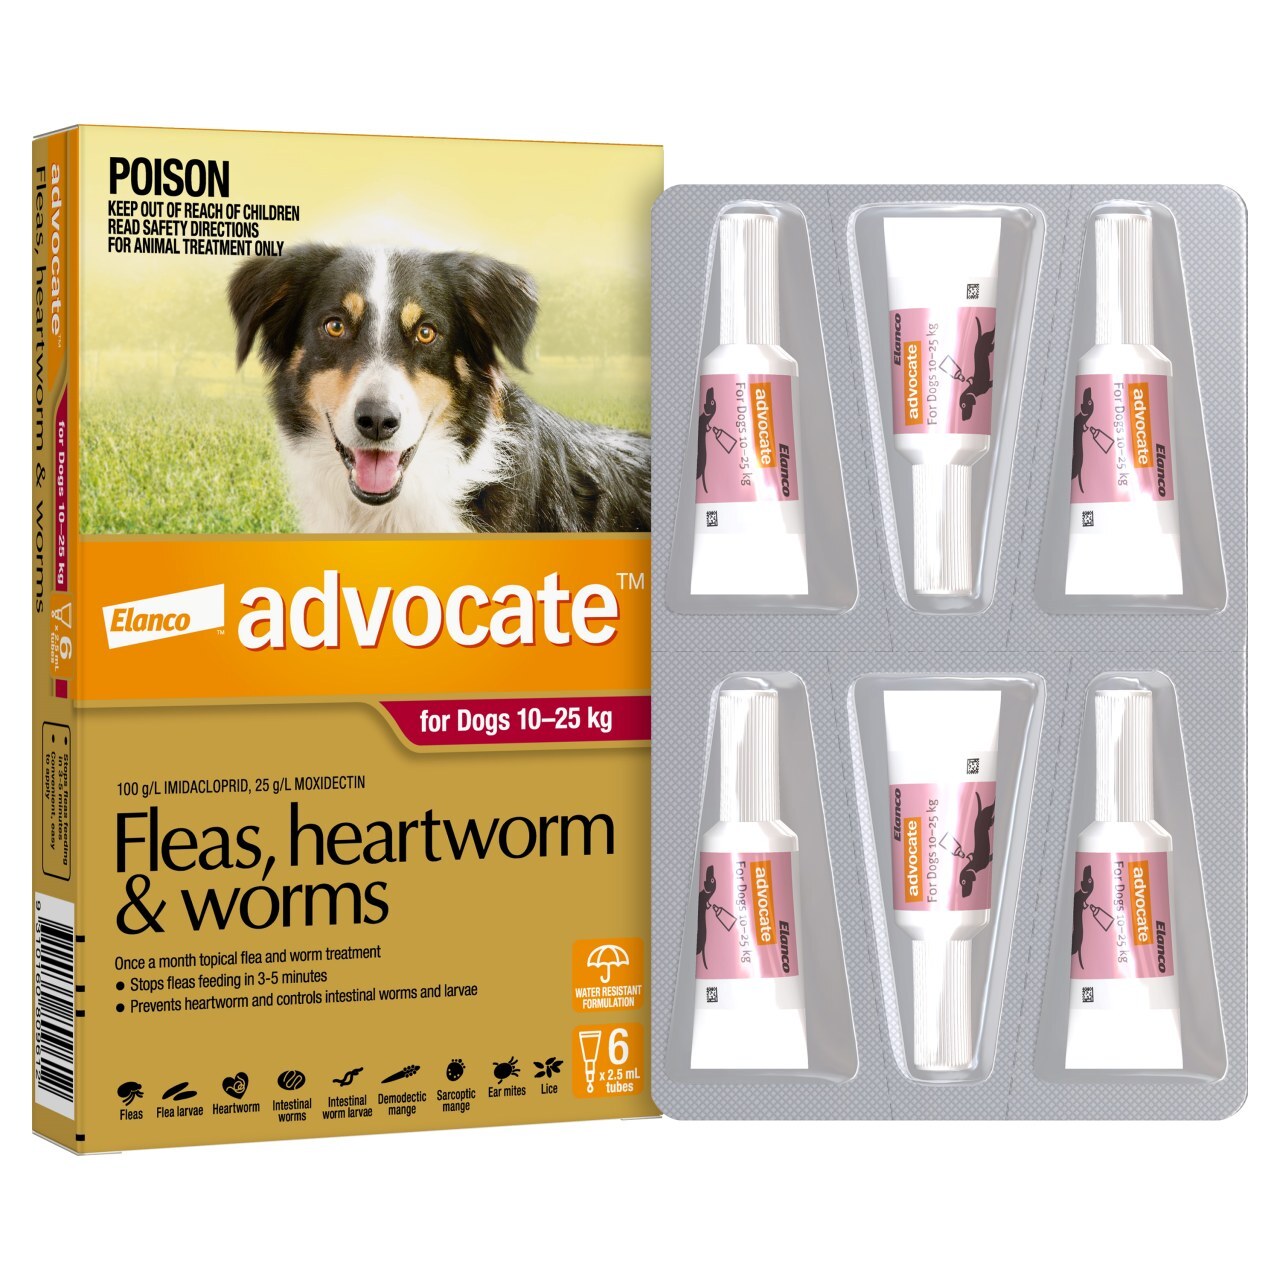 Advocate Spot-On Flea & Worm Control for Dogs 10-25kg - 6-pack image 2